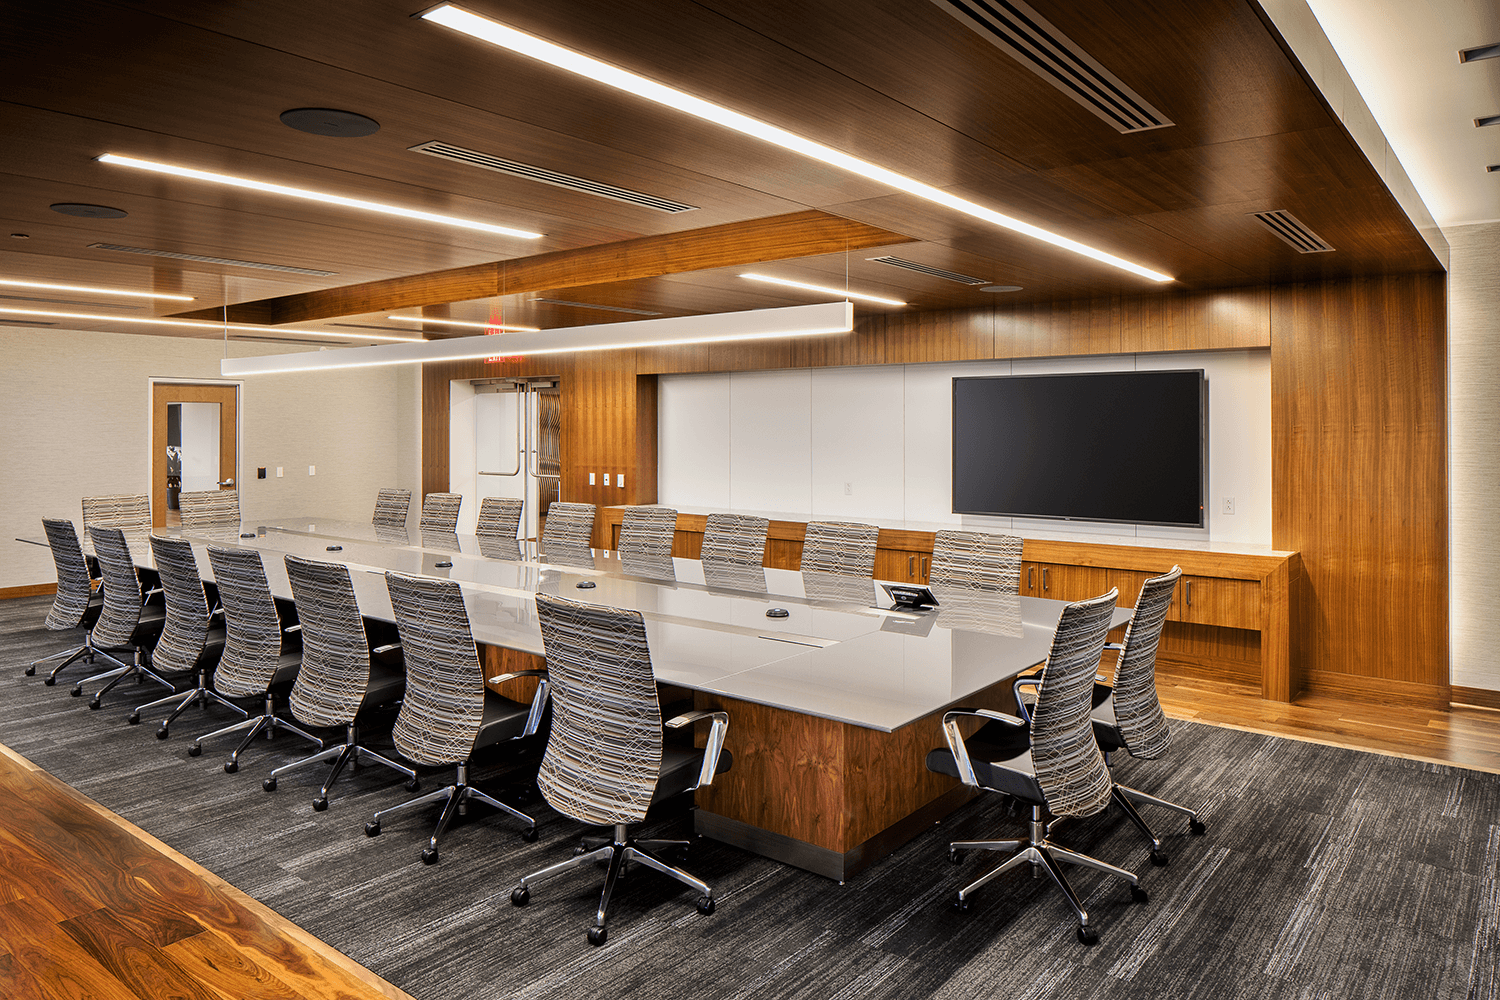 conference room with gray striped chairs and carpet, and wood accent features